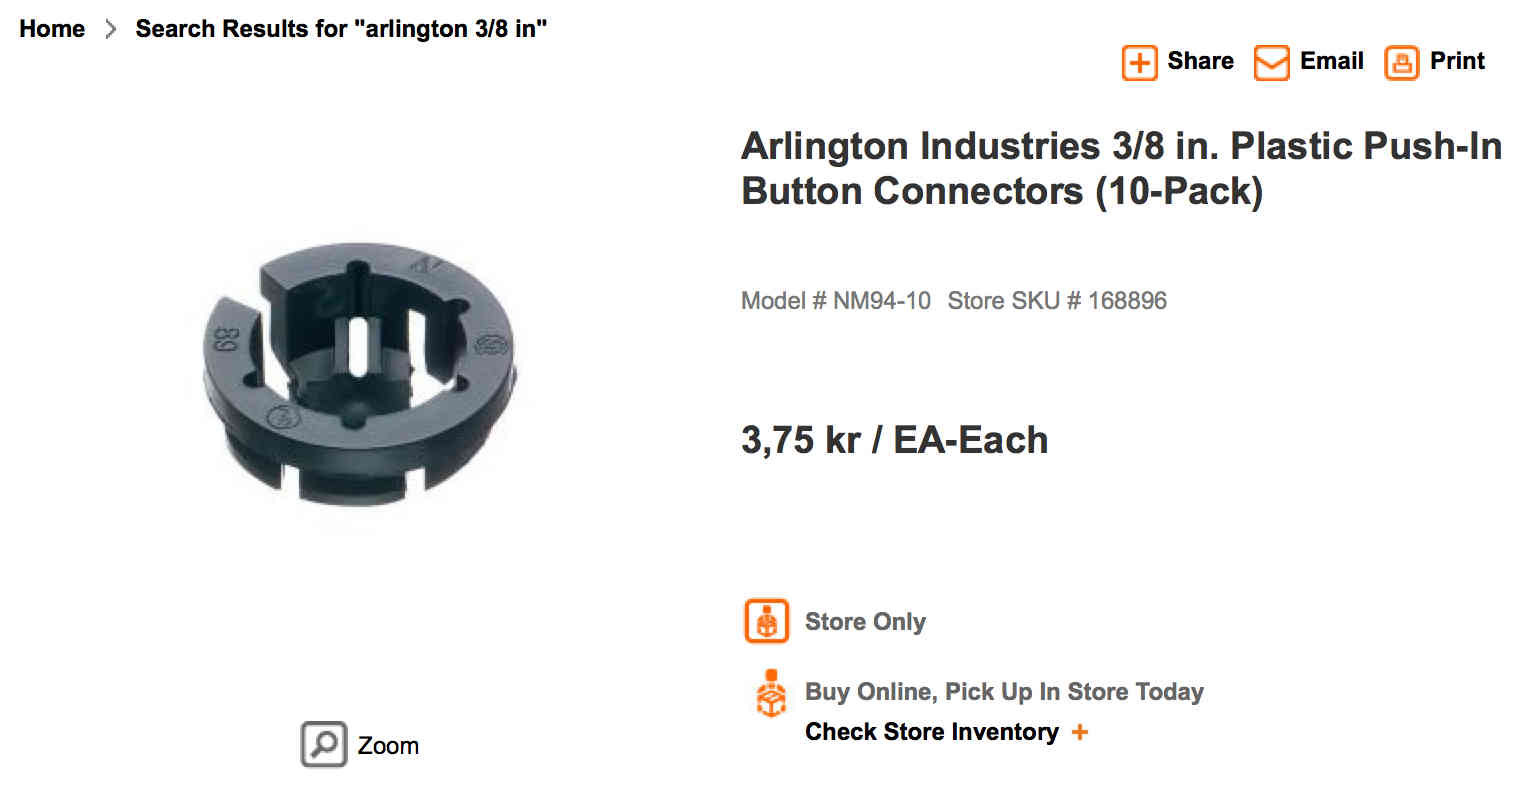 Home Depot product listing shows price as Swedish kronor, even though the amount is clearly US dollars.